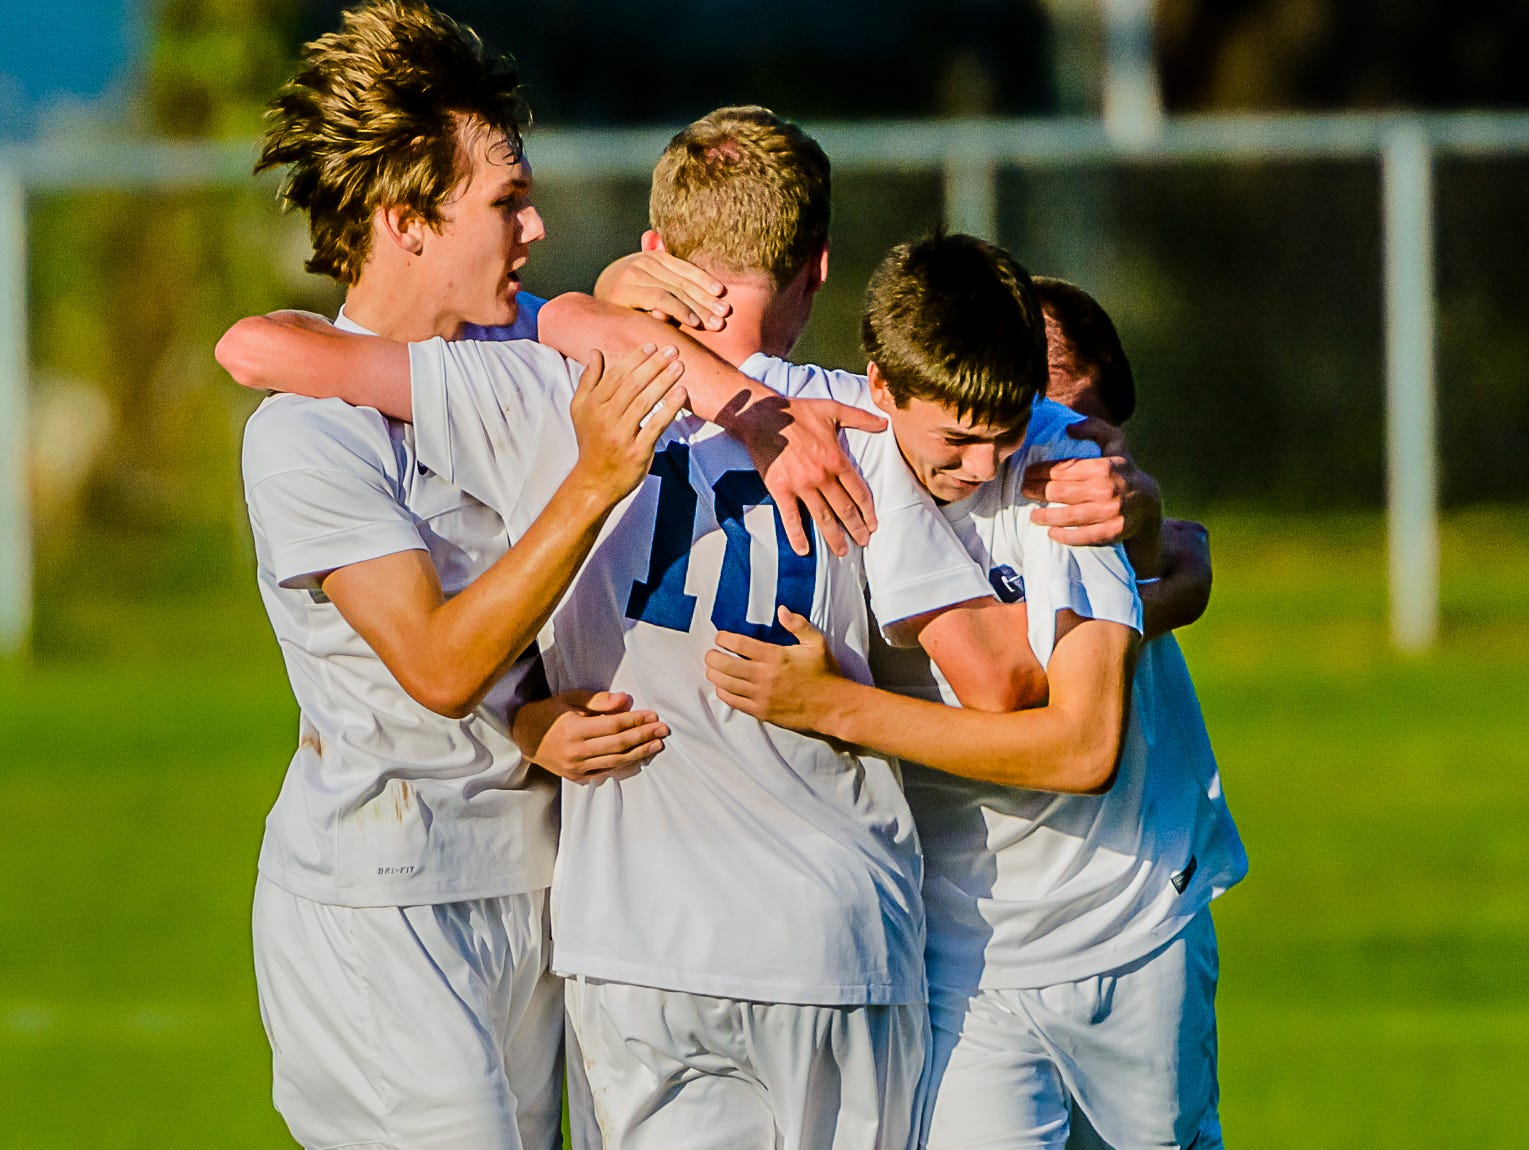 Erik Seelman,10, of Grand Ledge is embraced by some of his teammates after scoring with 10:39 remaining in the 1st half of their CAAC Gold Cup first round game with Jackson Tuesday October 4, 2016 in Grand Ledge. The goal put Grand Ledge up 1-0 and proved to be the game winner.